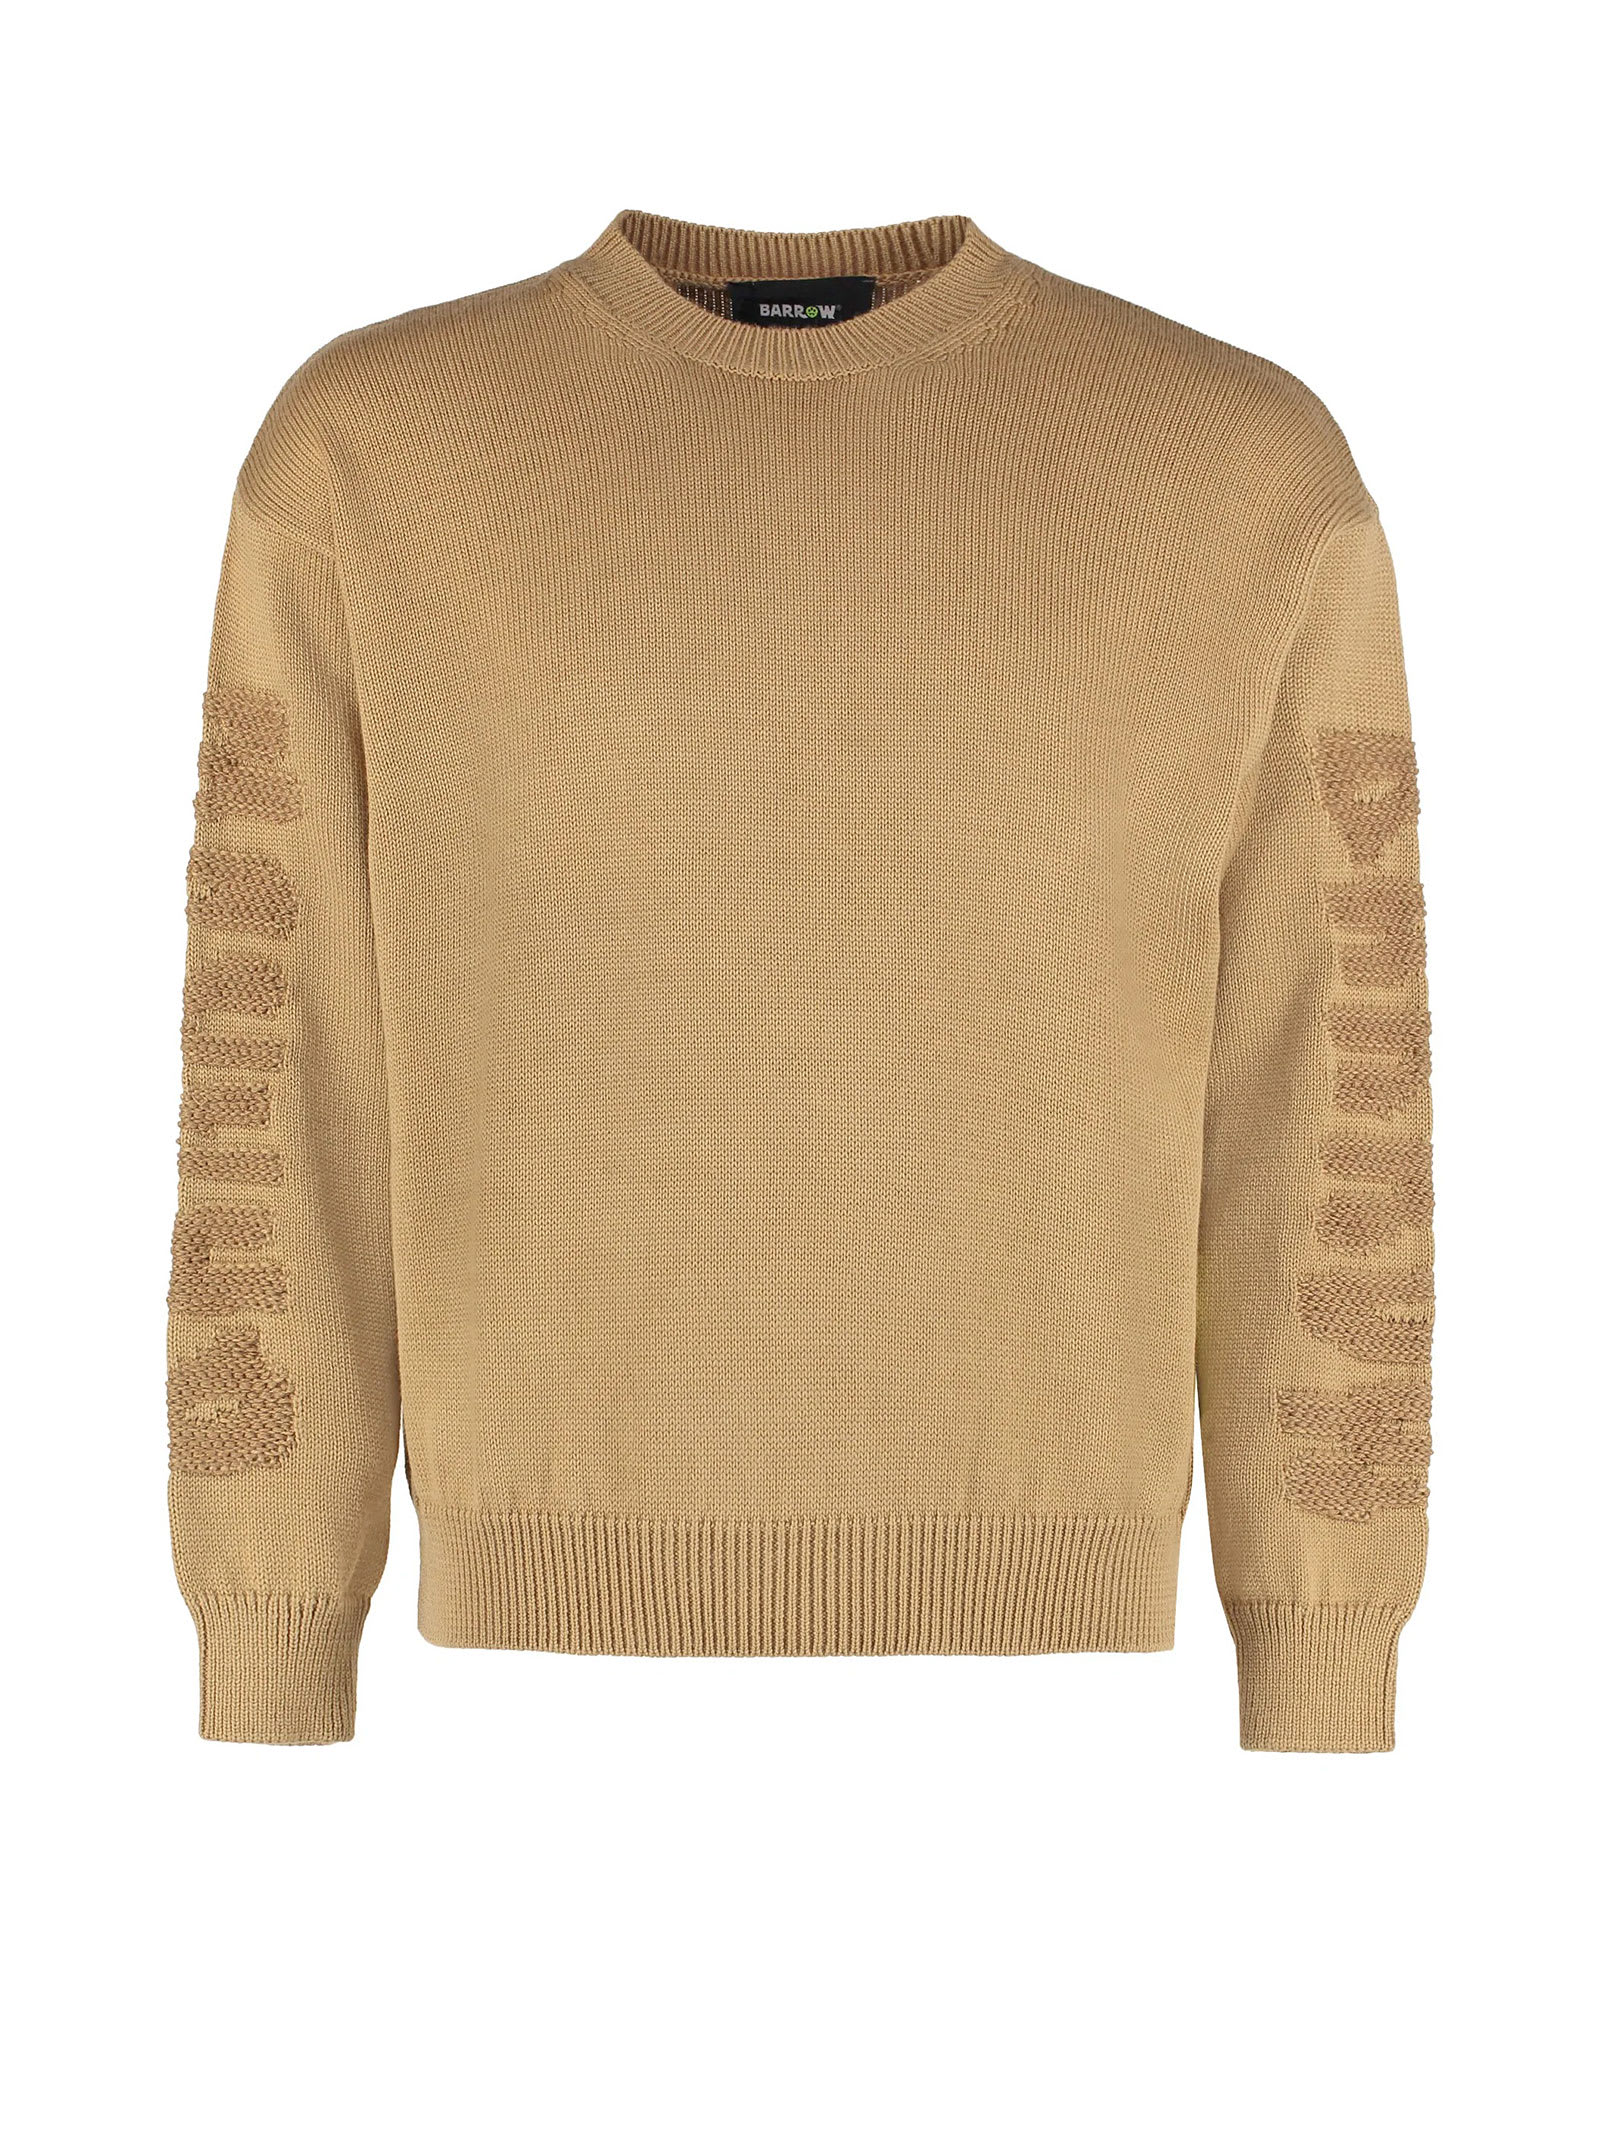 Barrow Crew-neck Jumper With Lettering Logo Details